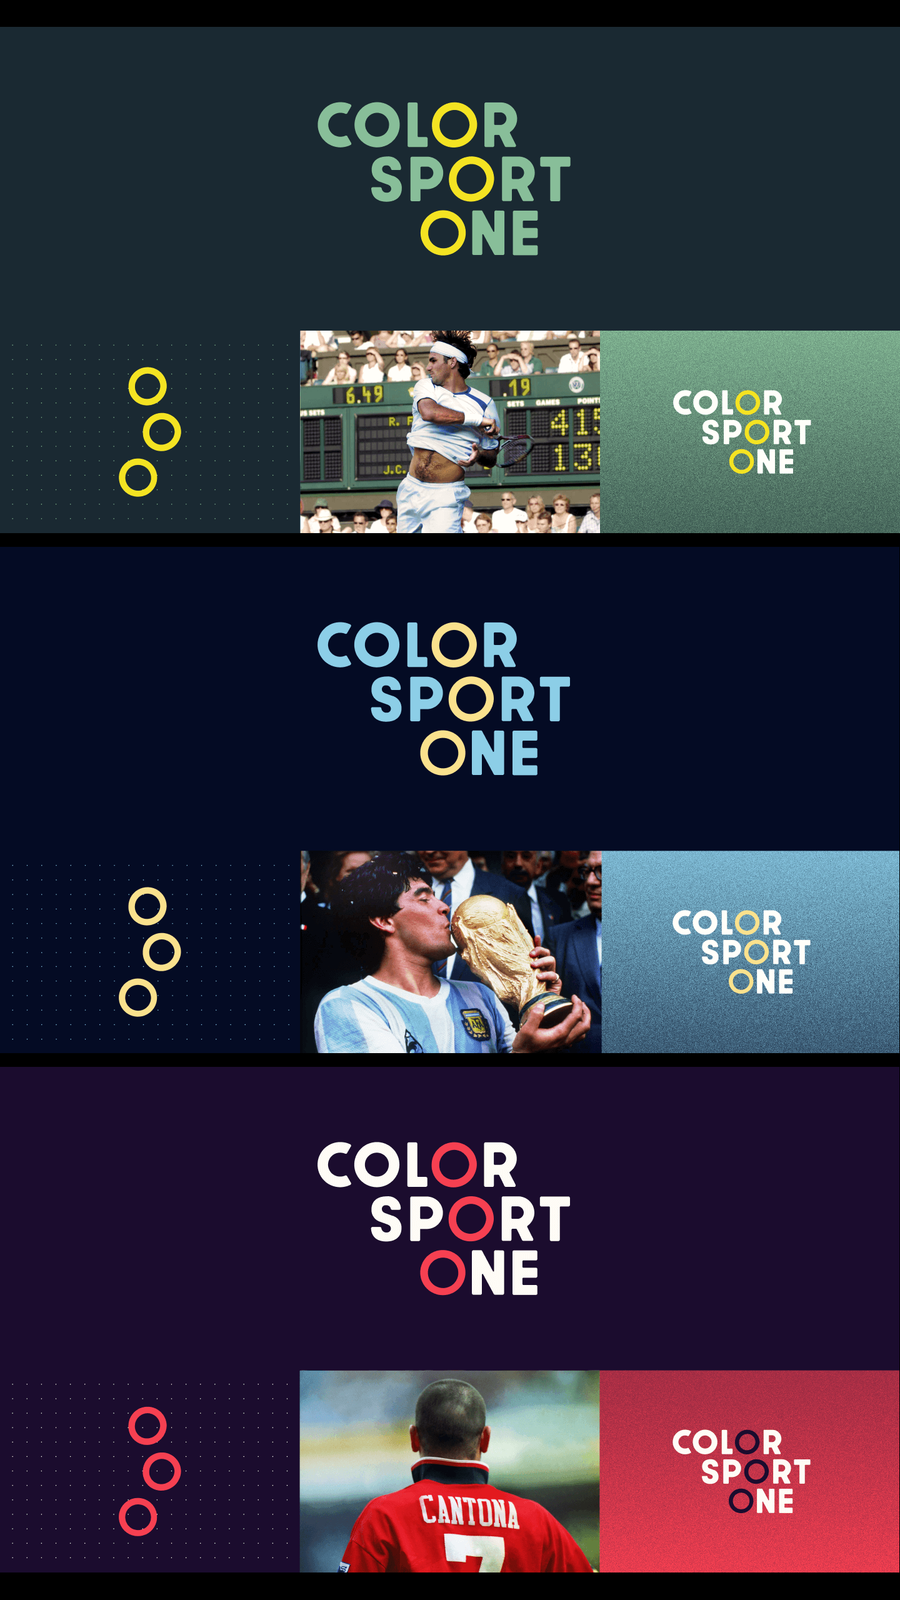 Colorsport one logo in various colours